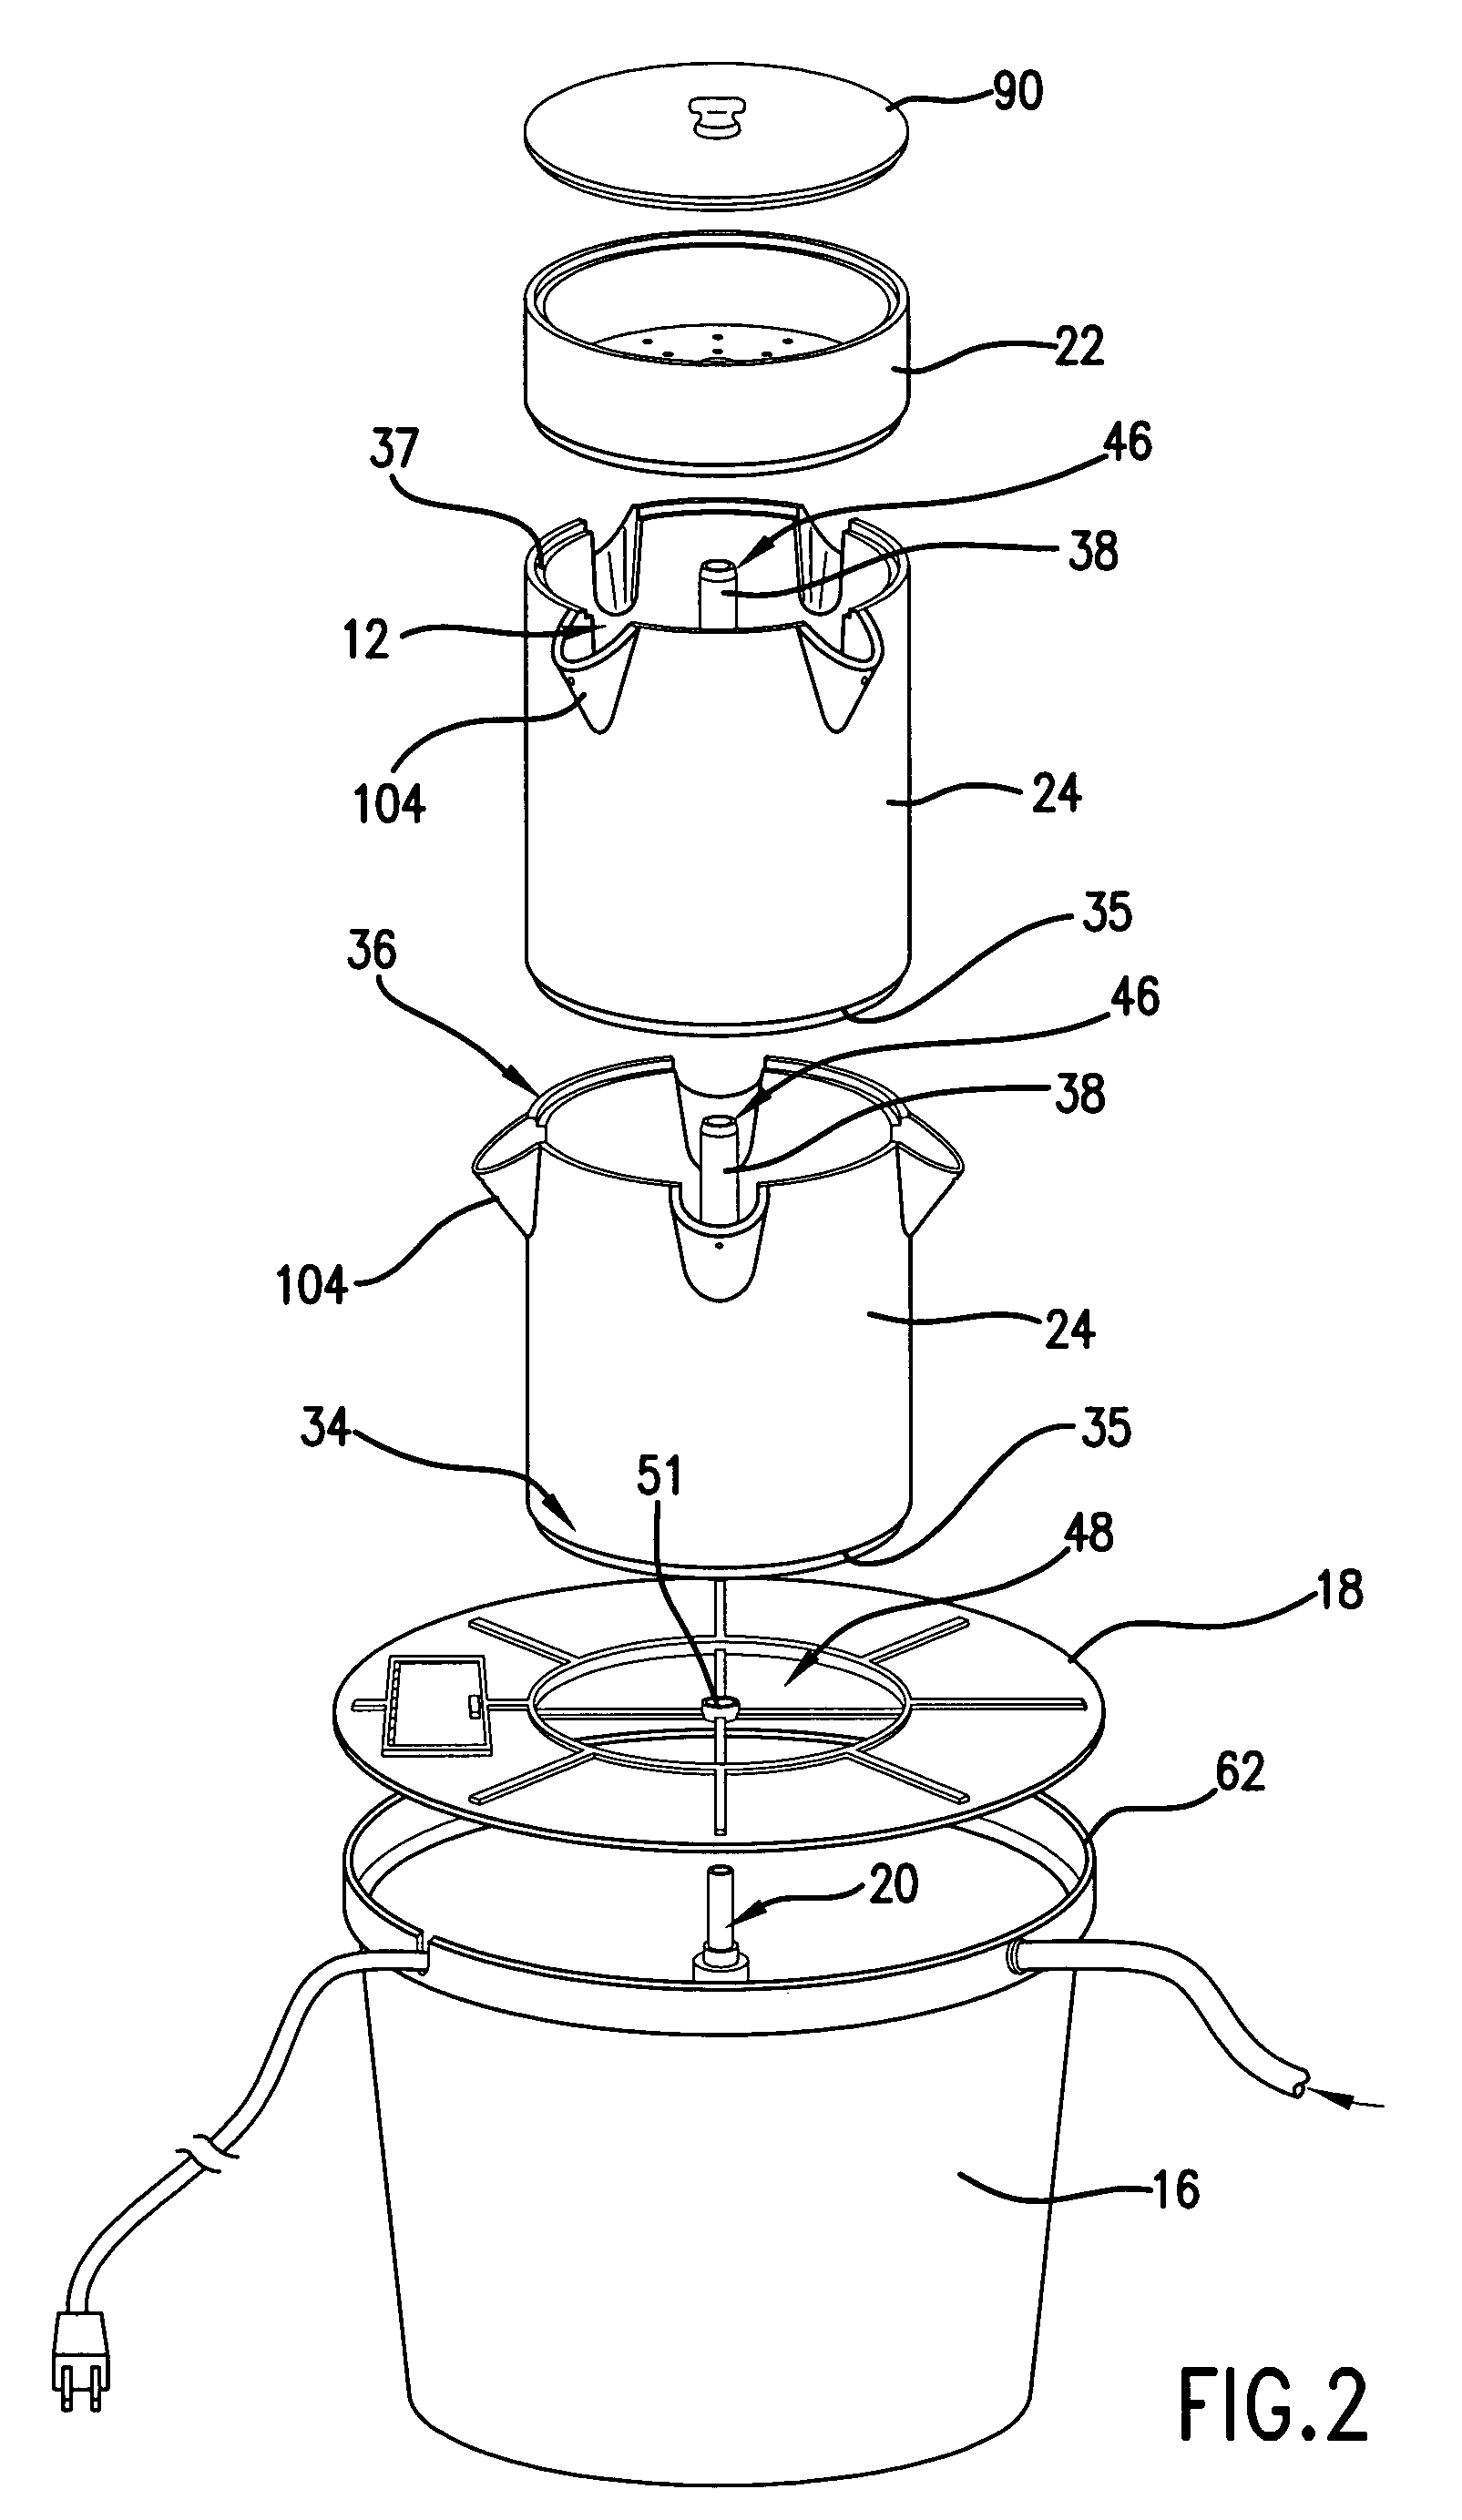 Hydroponic plant cultivating apparatus